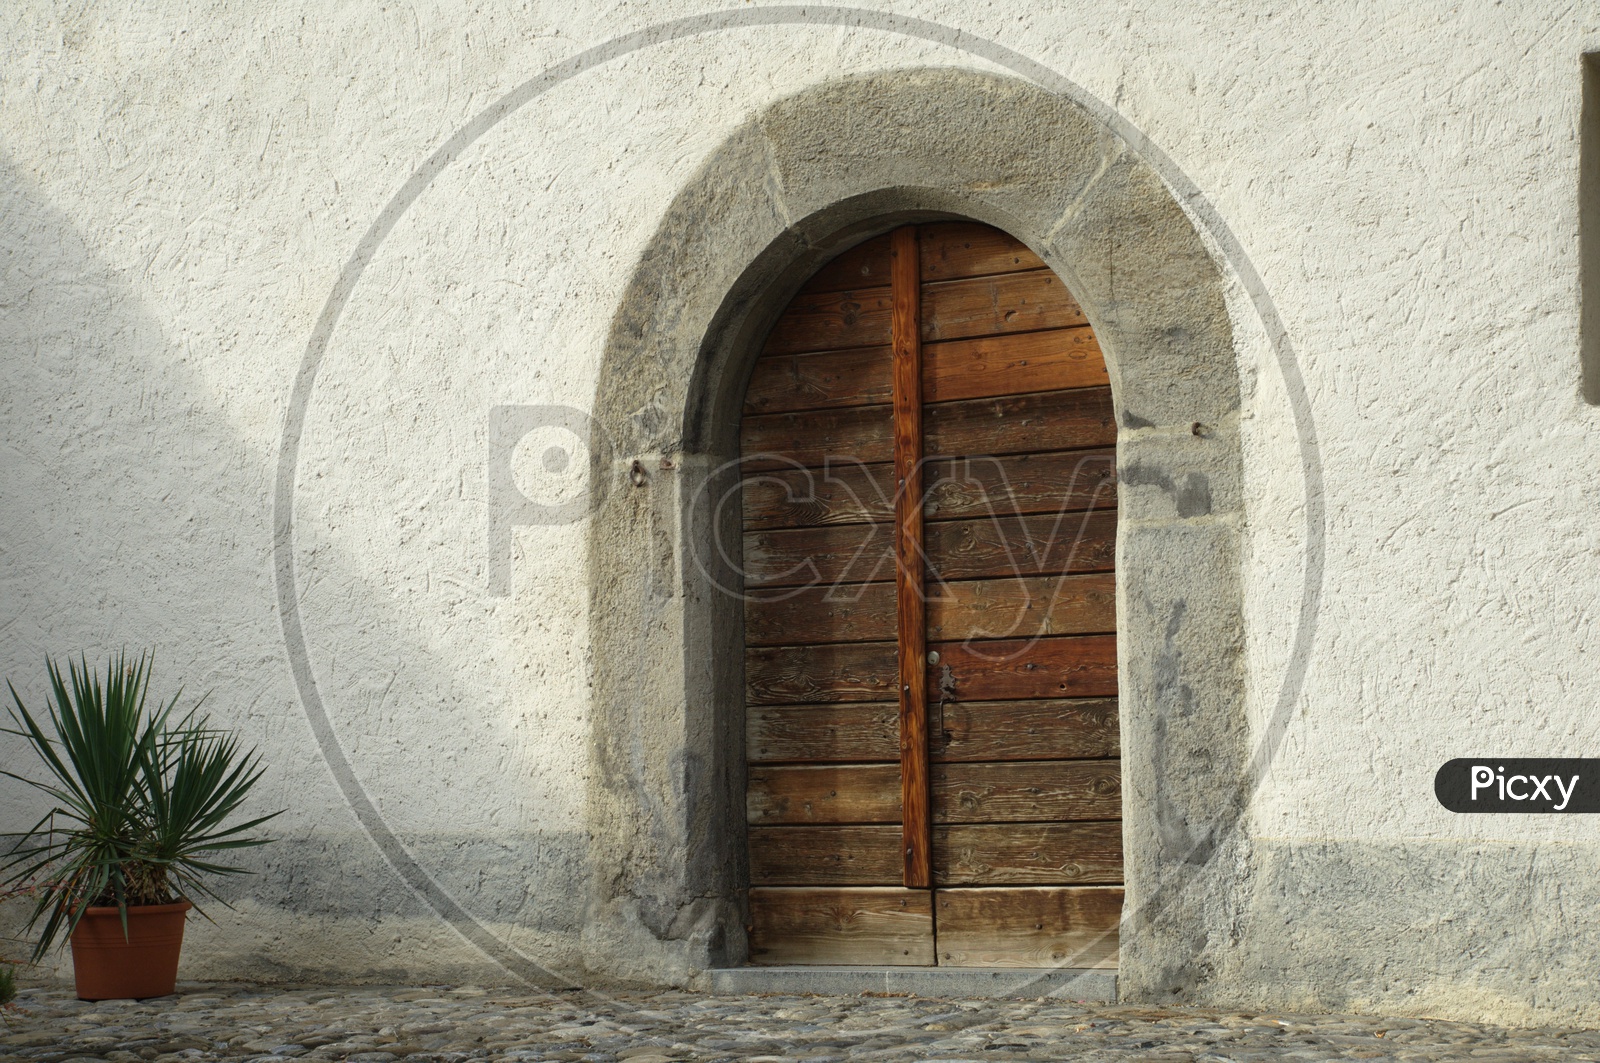 A arch like entrance of a building with wooden doors